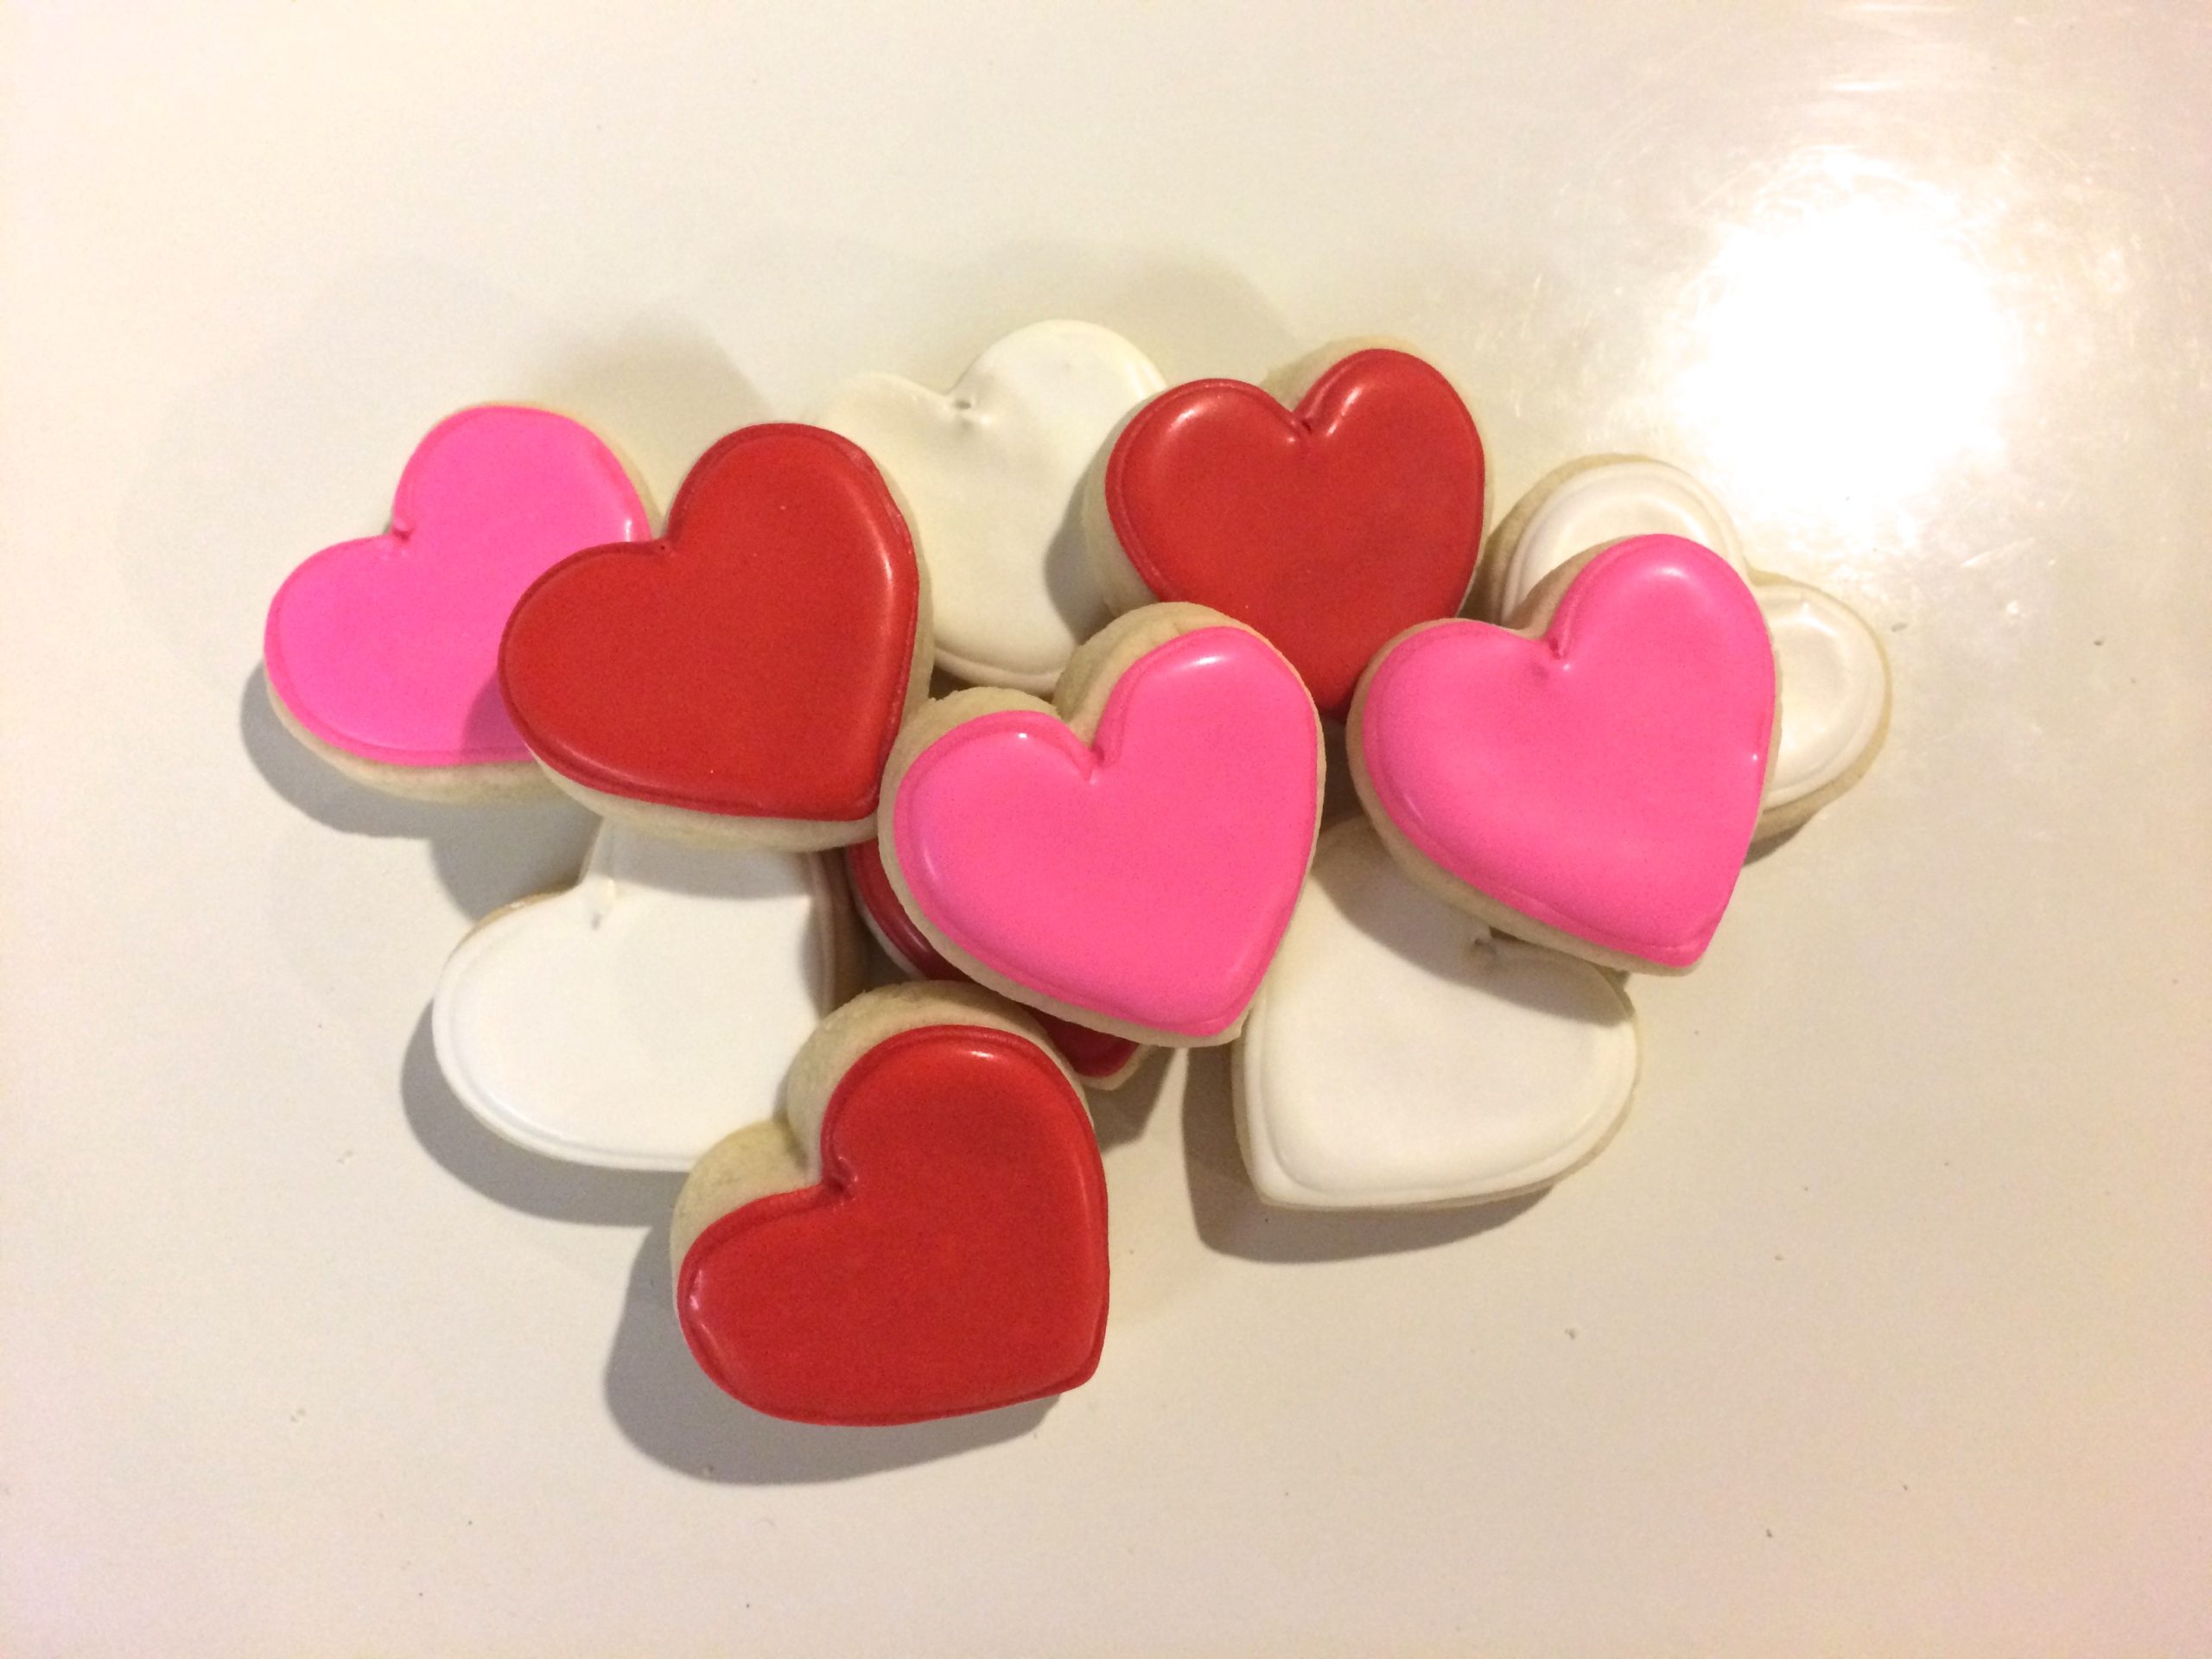 Custom Valentine's Day Cookies - The Whimsy Cookie Company